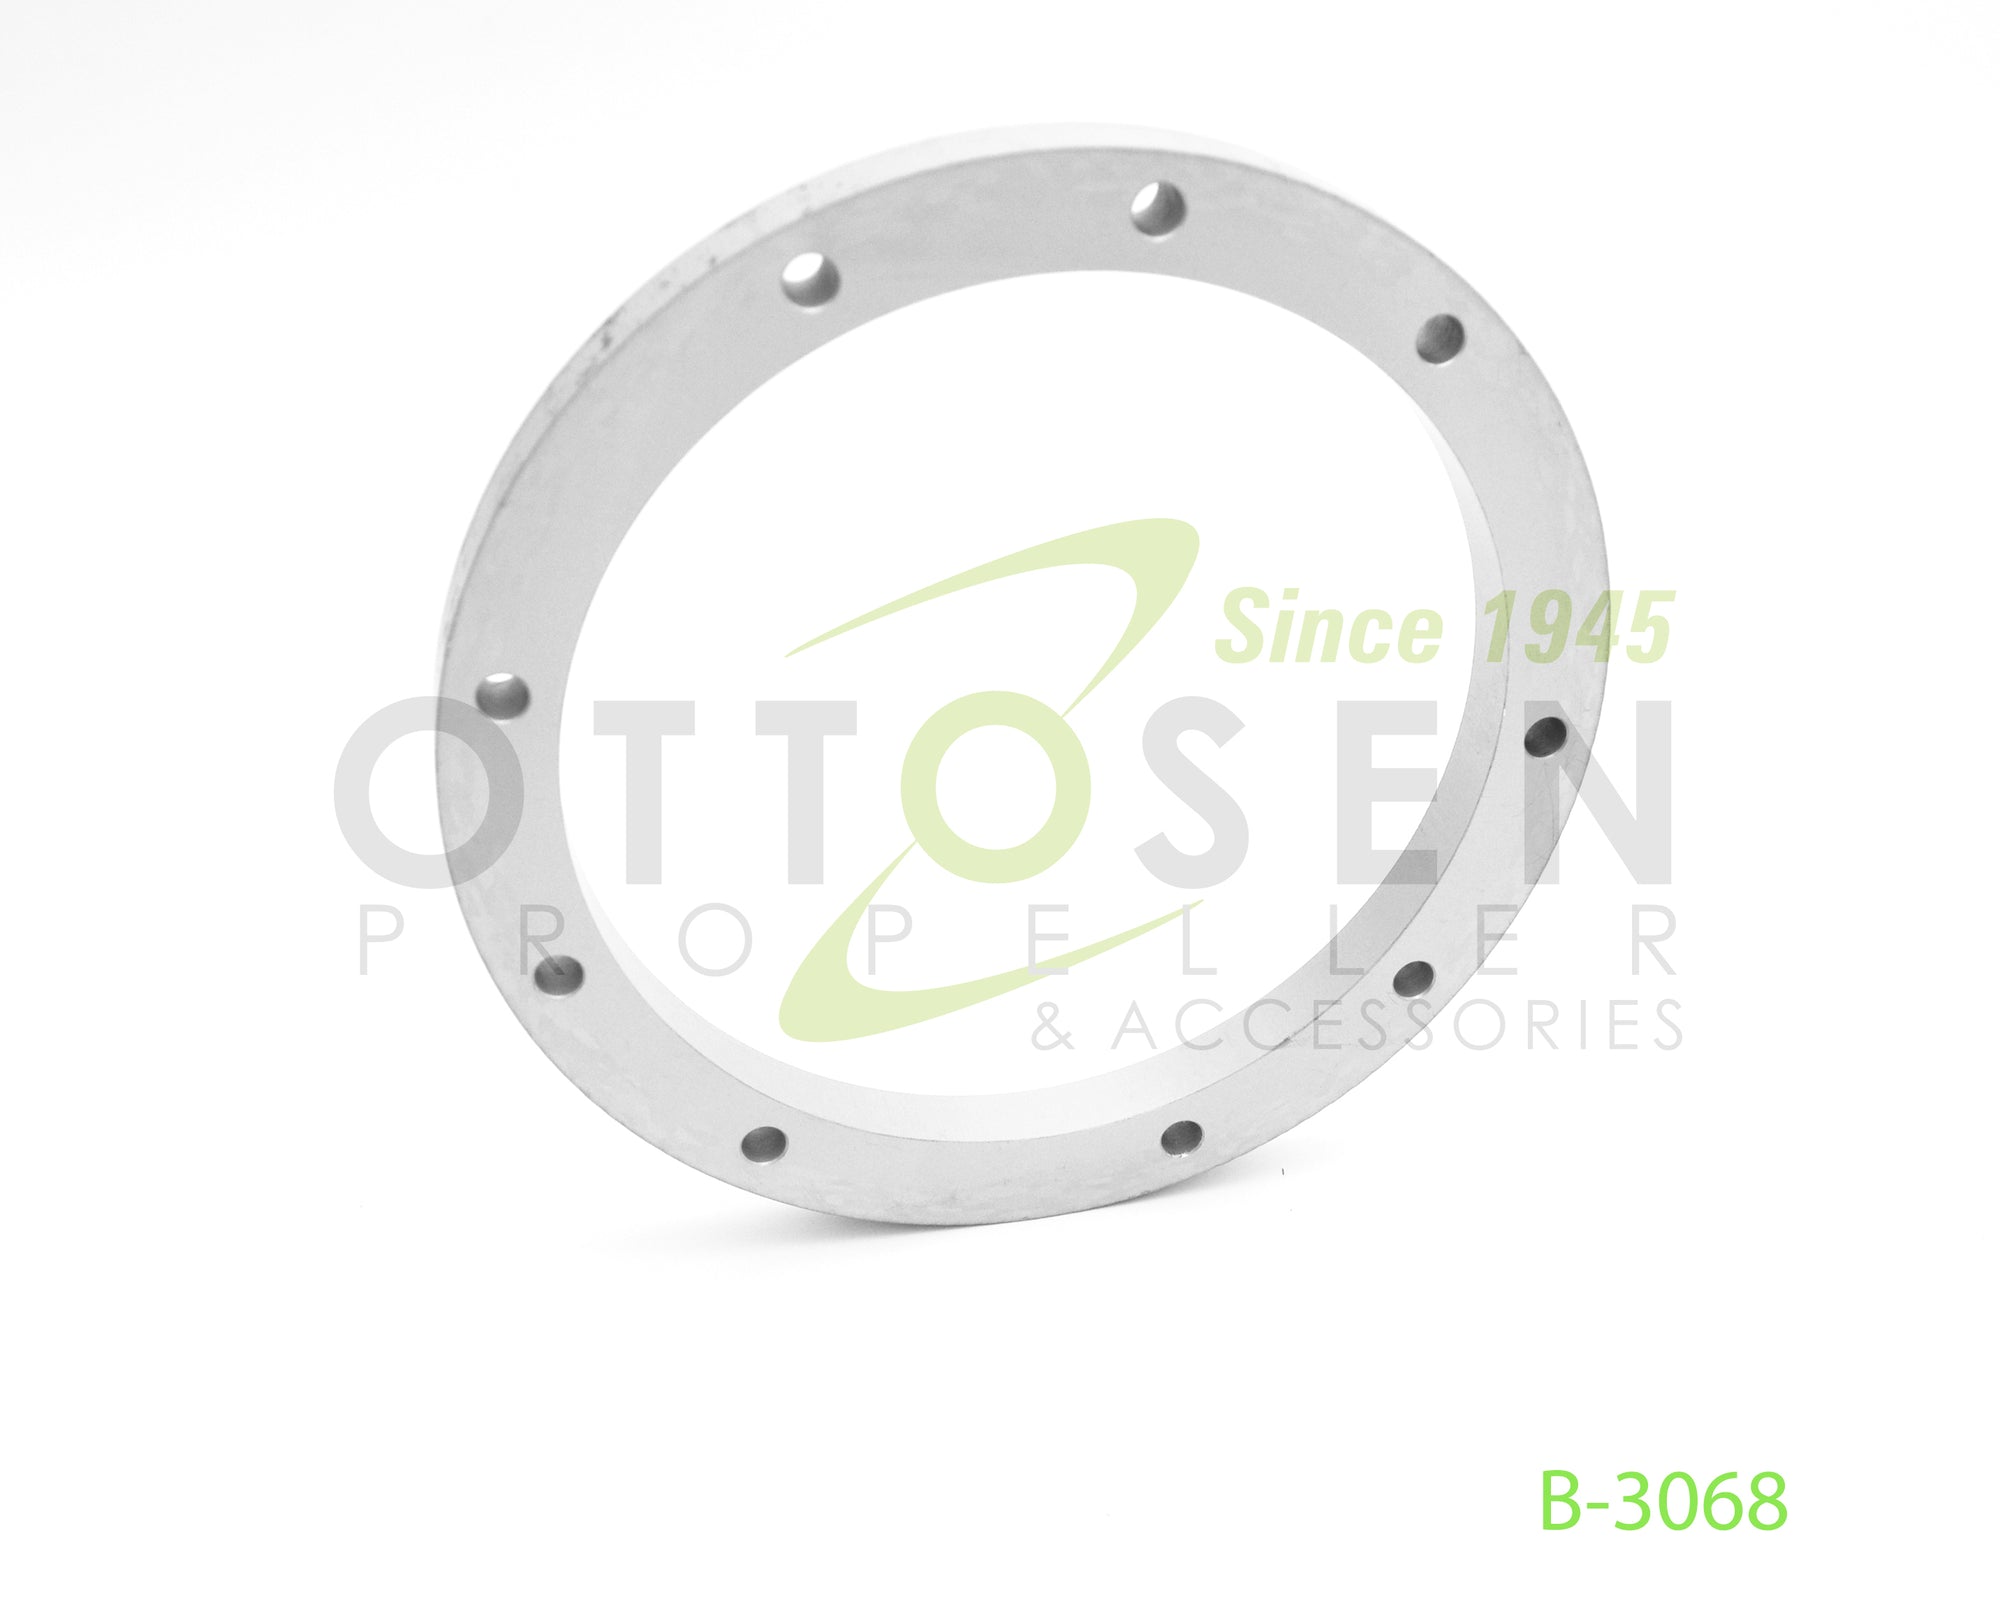 B-3068-HARTZELL-PROPELLER-ALUMINUM-RING-SPACER-PICTURE-1